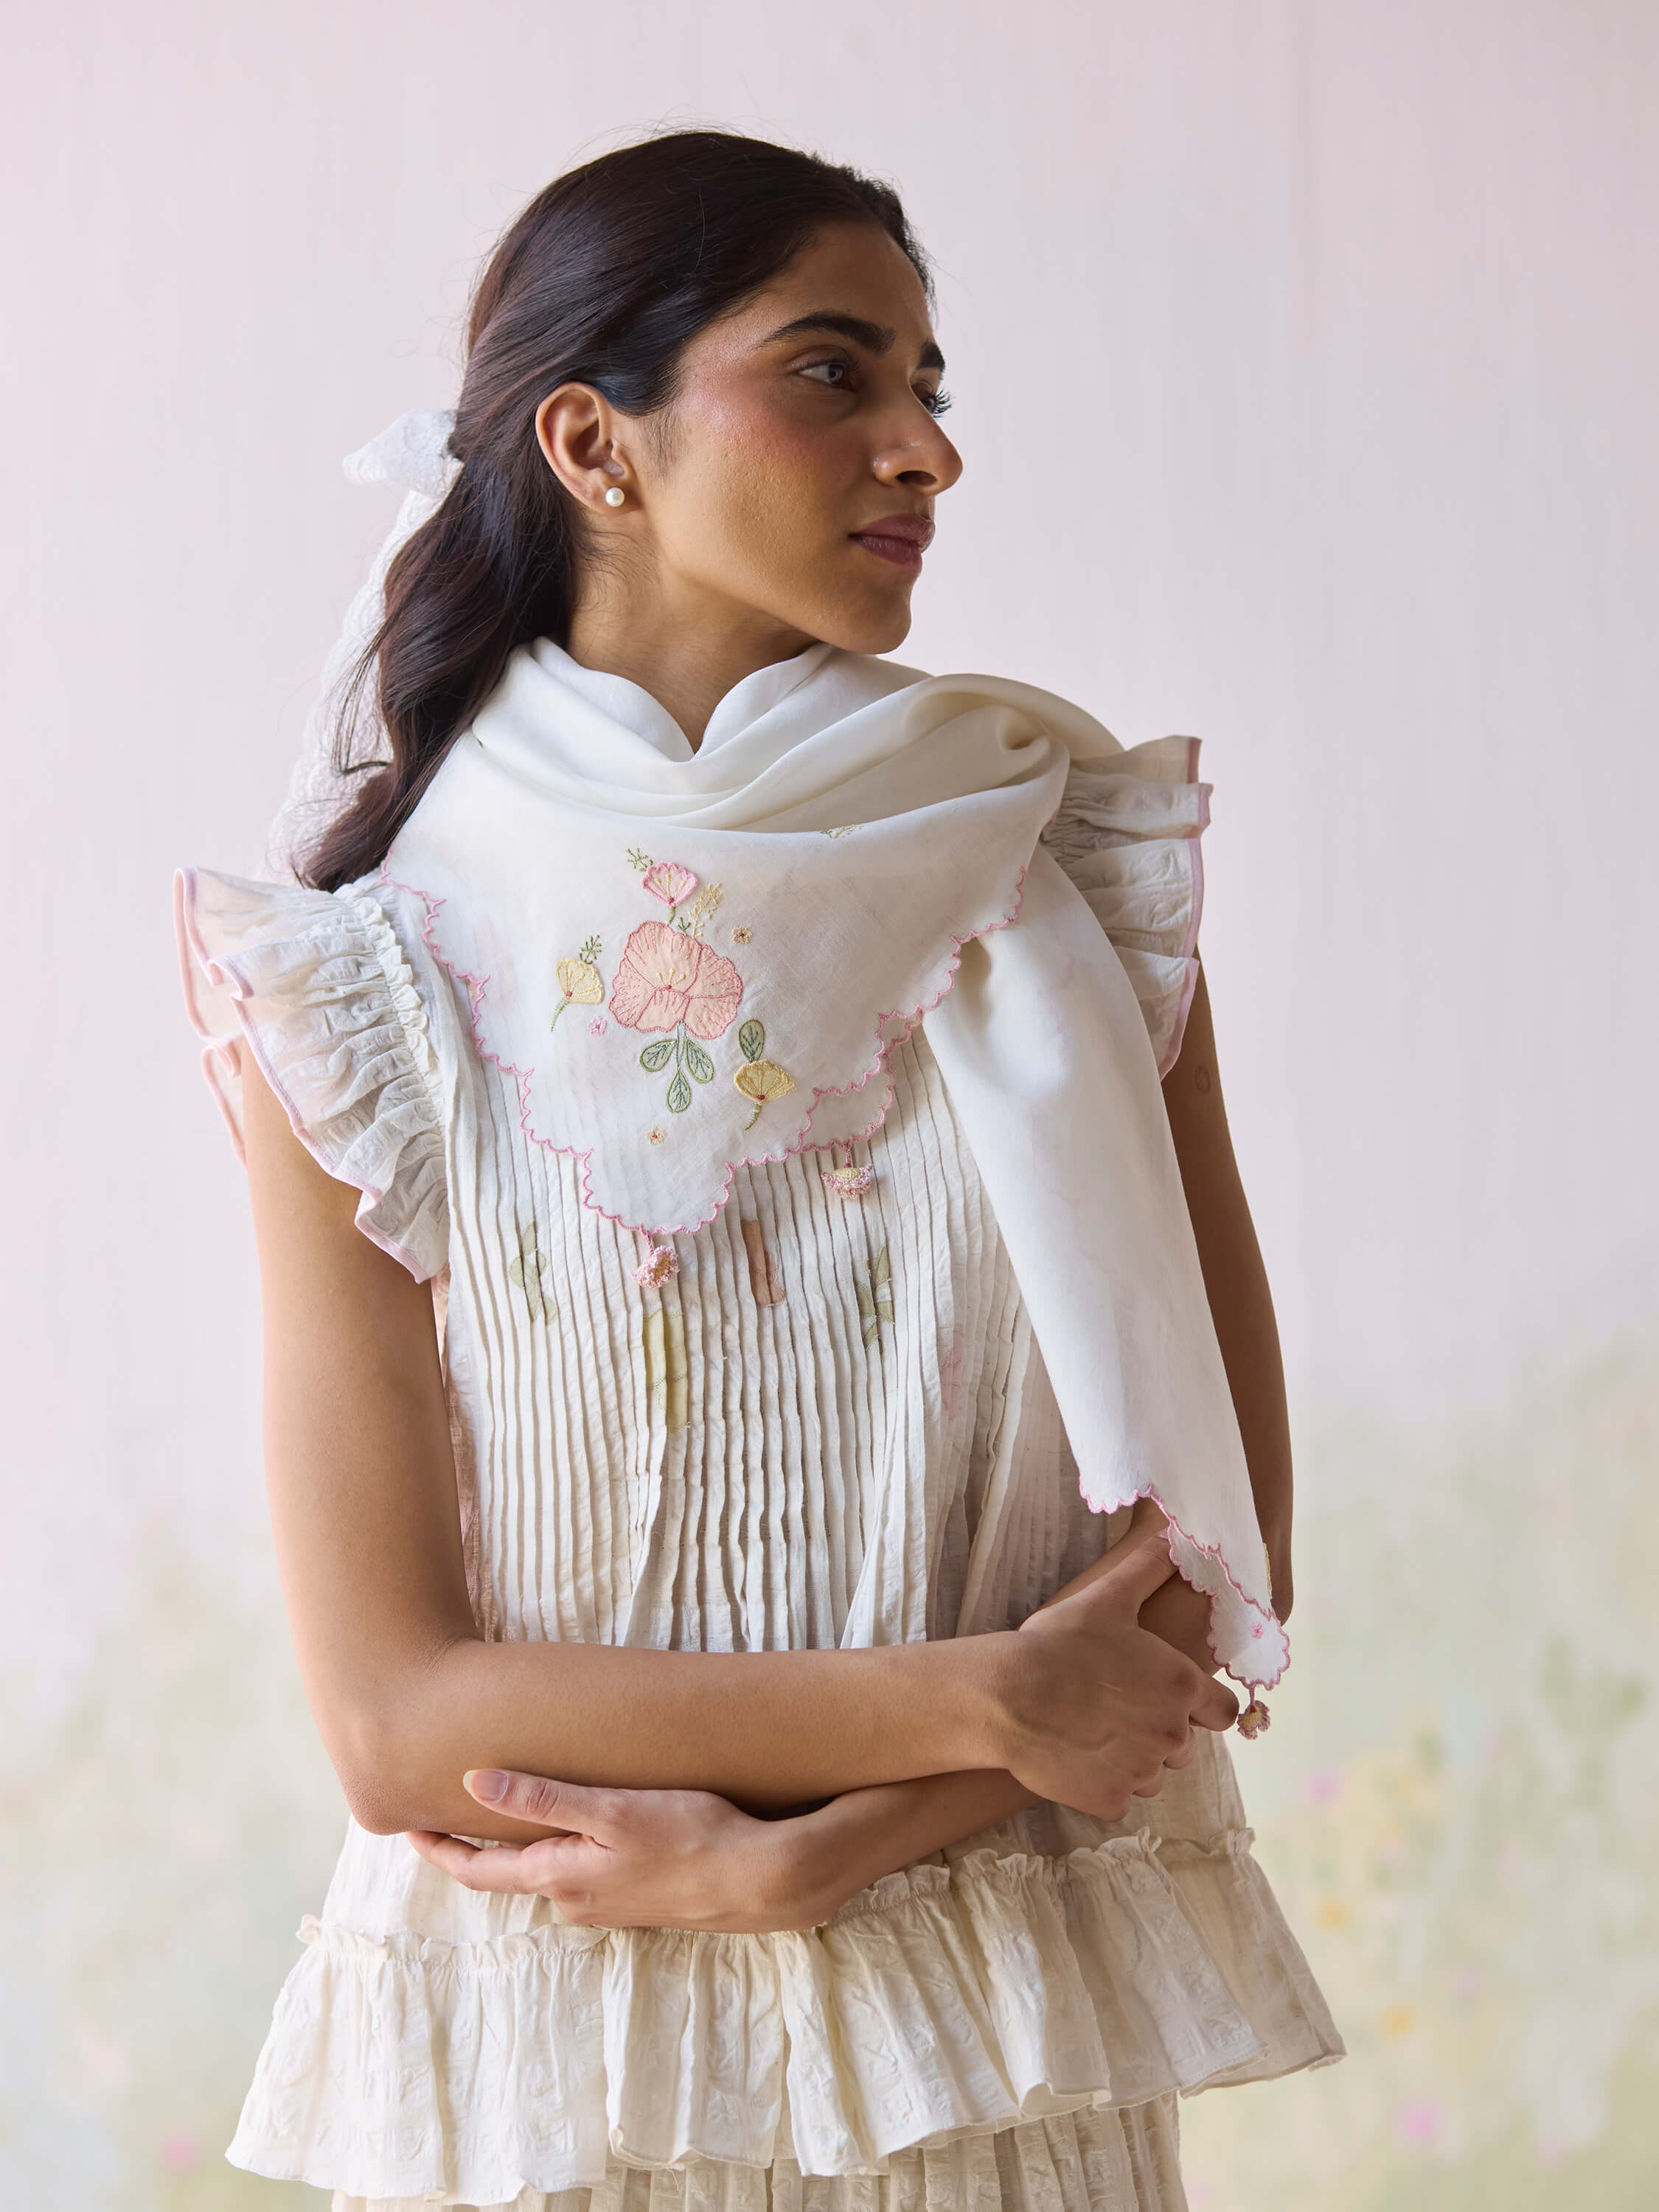 Woman in embroidered white scarf and ruffled dress looking sideways